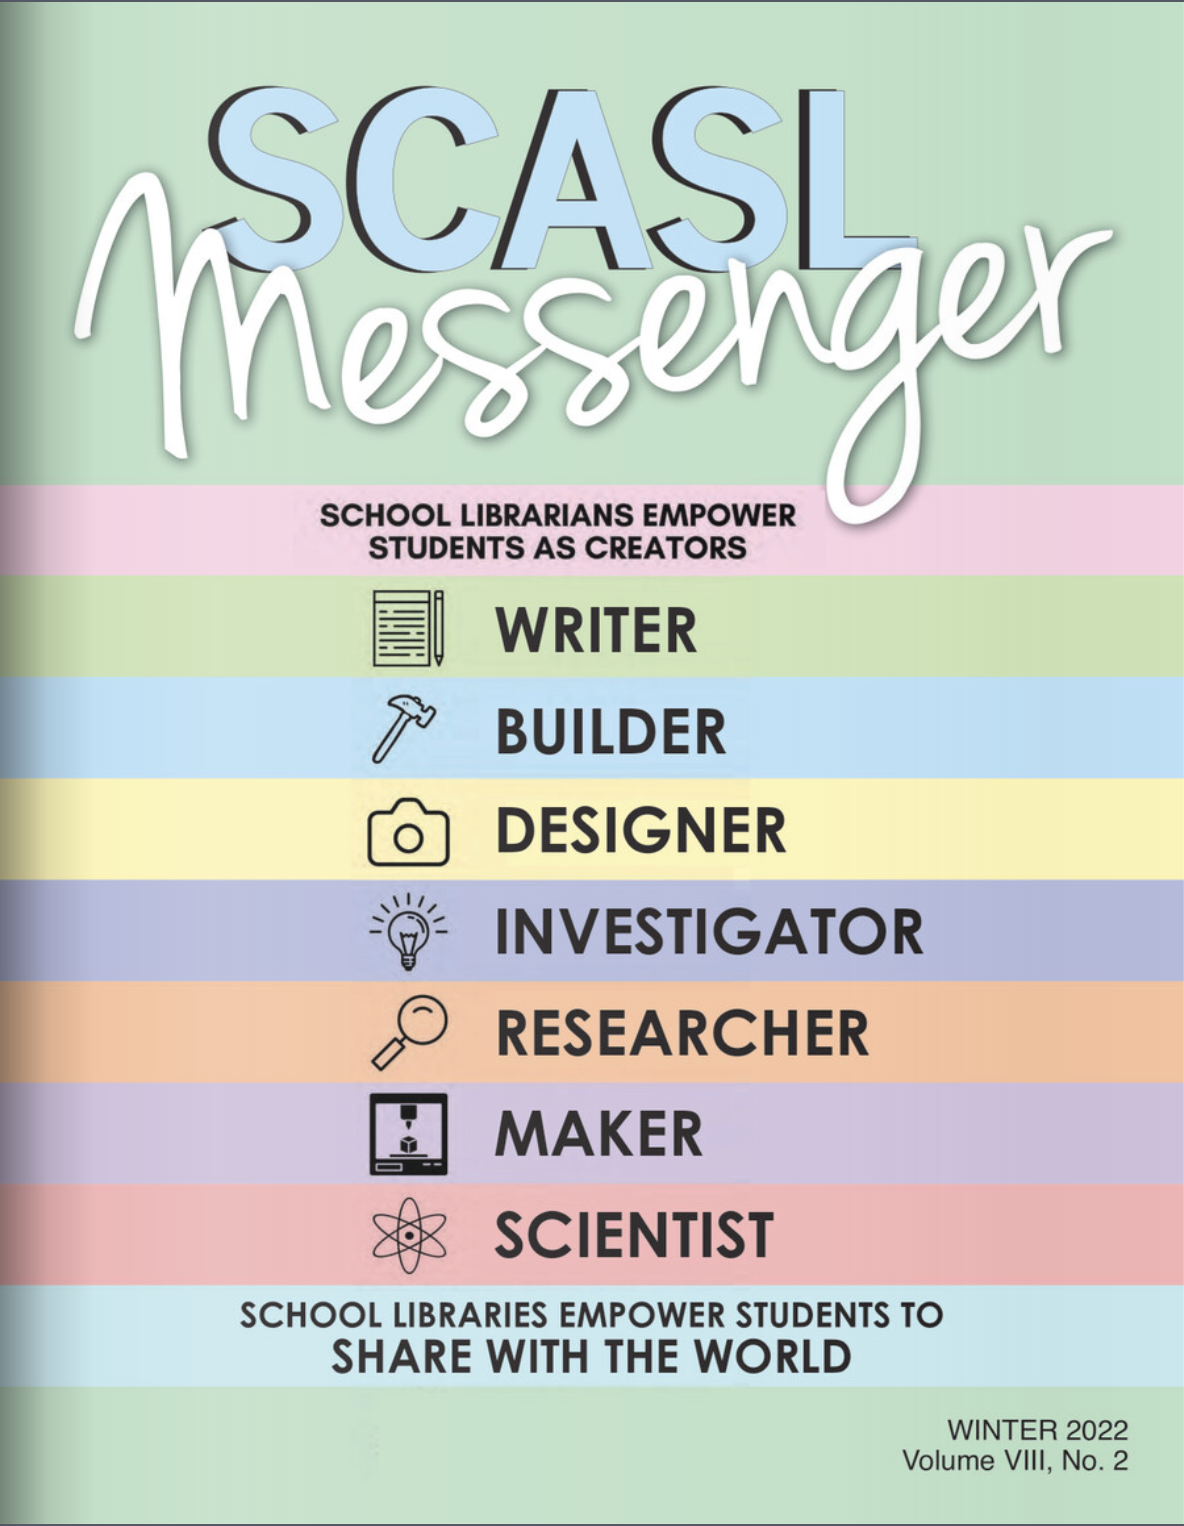 screenshot of the front cover of the Winter SCASL messenger